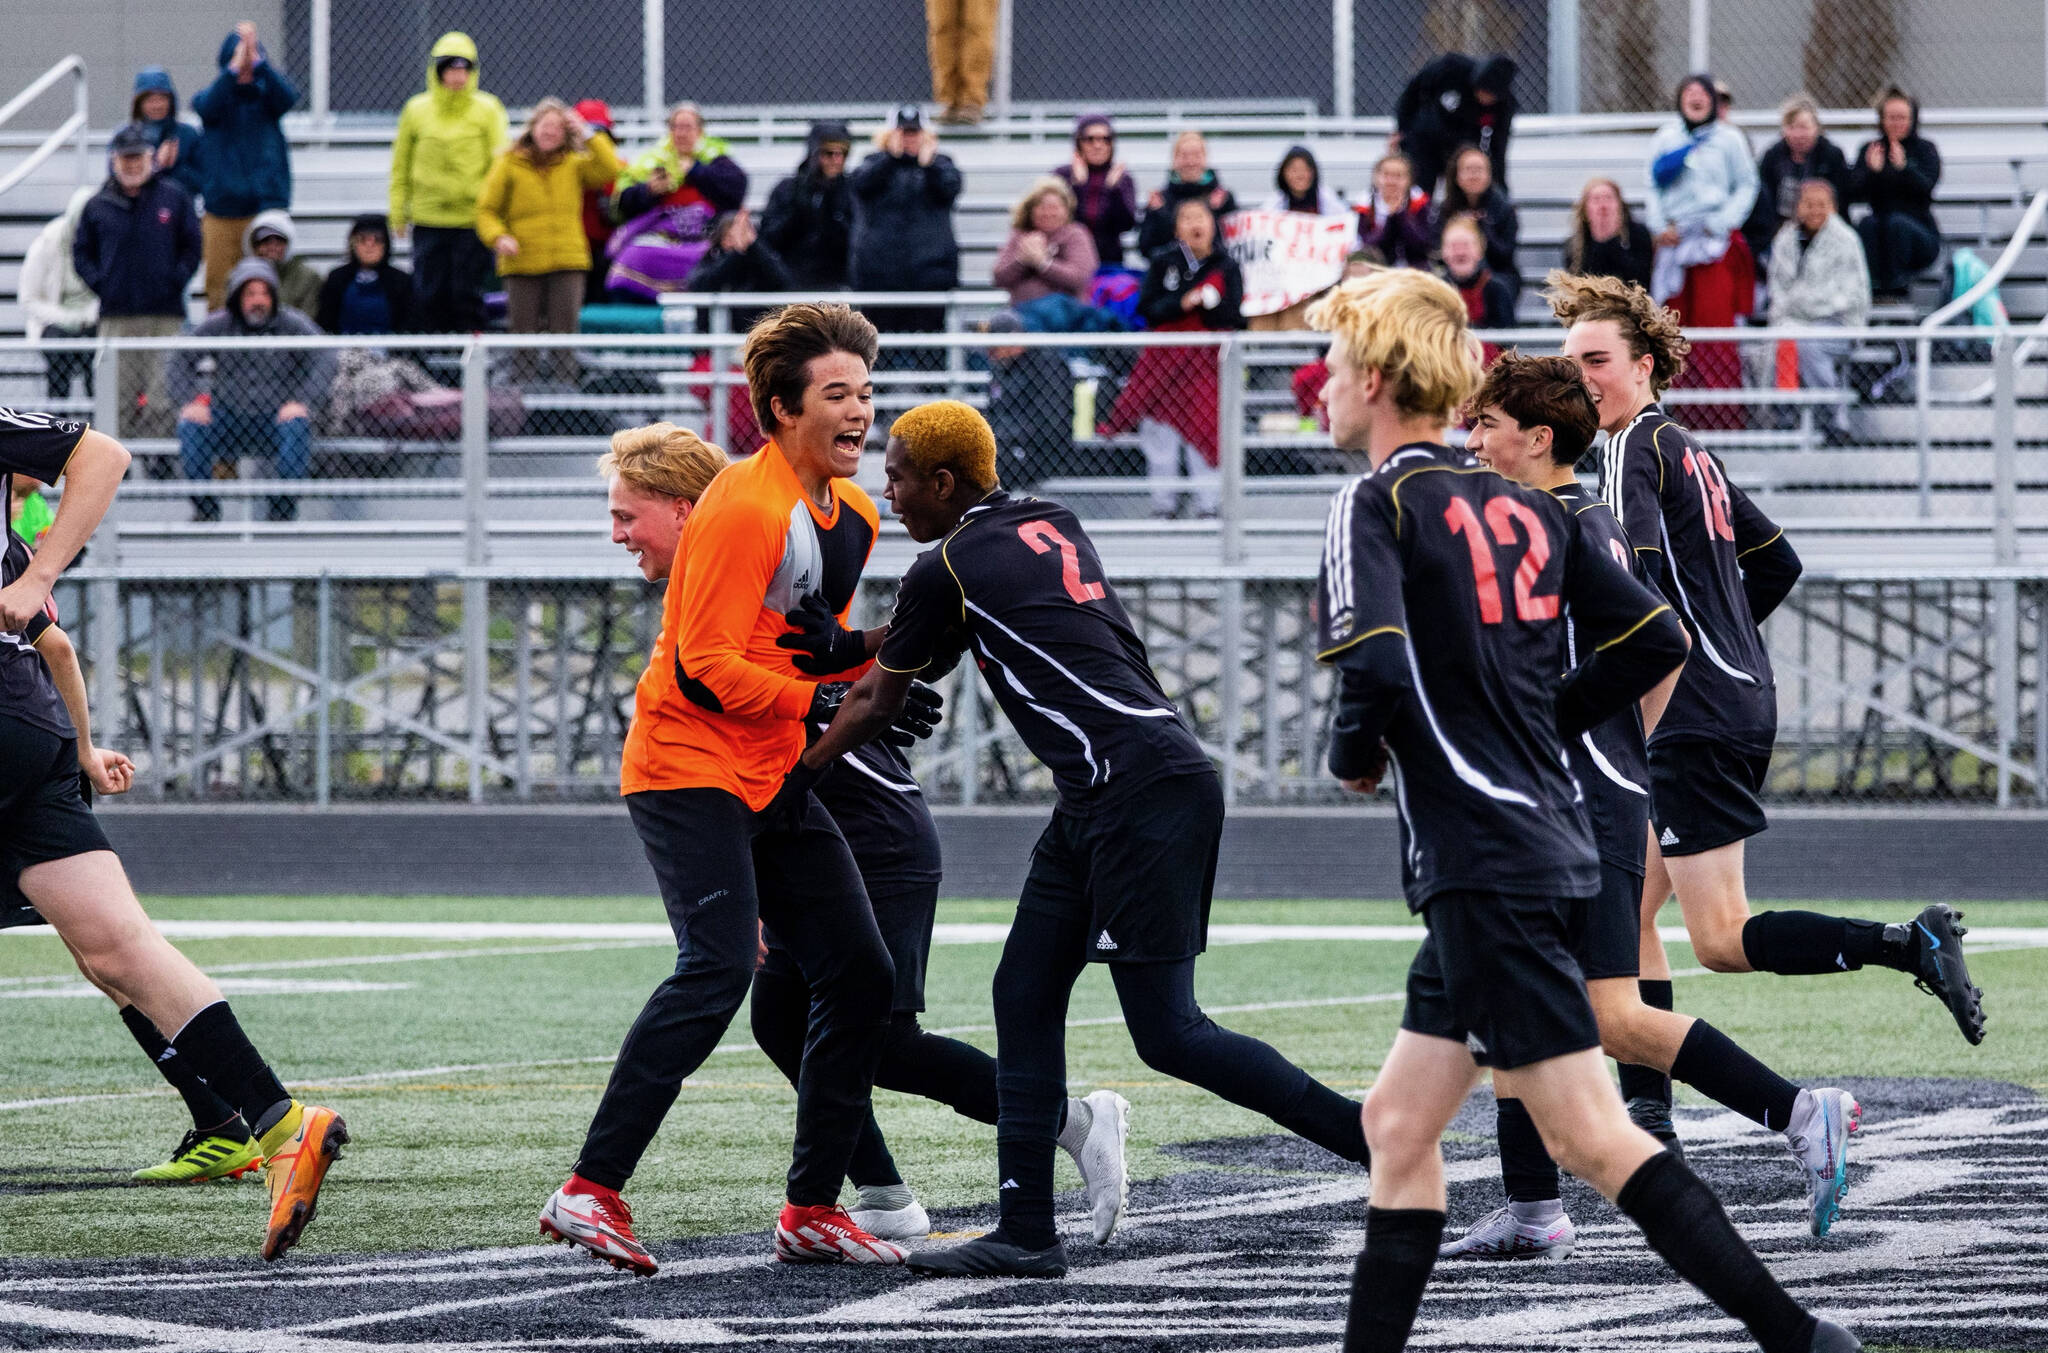 JDHS boys junior keeper Alex Mallott celebrates a goal by sophomore Ahmir Parker (2) during the Crimson Bears 2-0 win over Ketchikan in the ASAA DII Boys State Soccer semifinal, Friday, at West Anchorage High School. (Courtesy Photo / JDHS soccer)